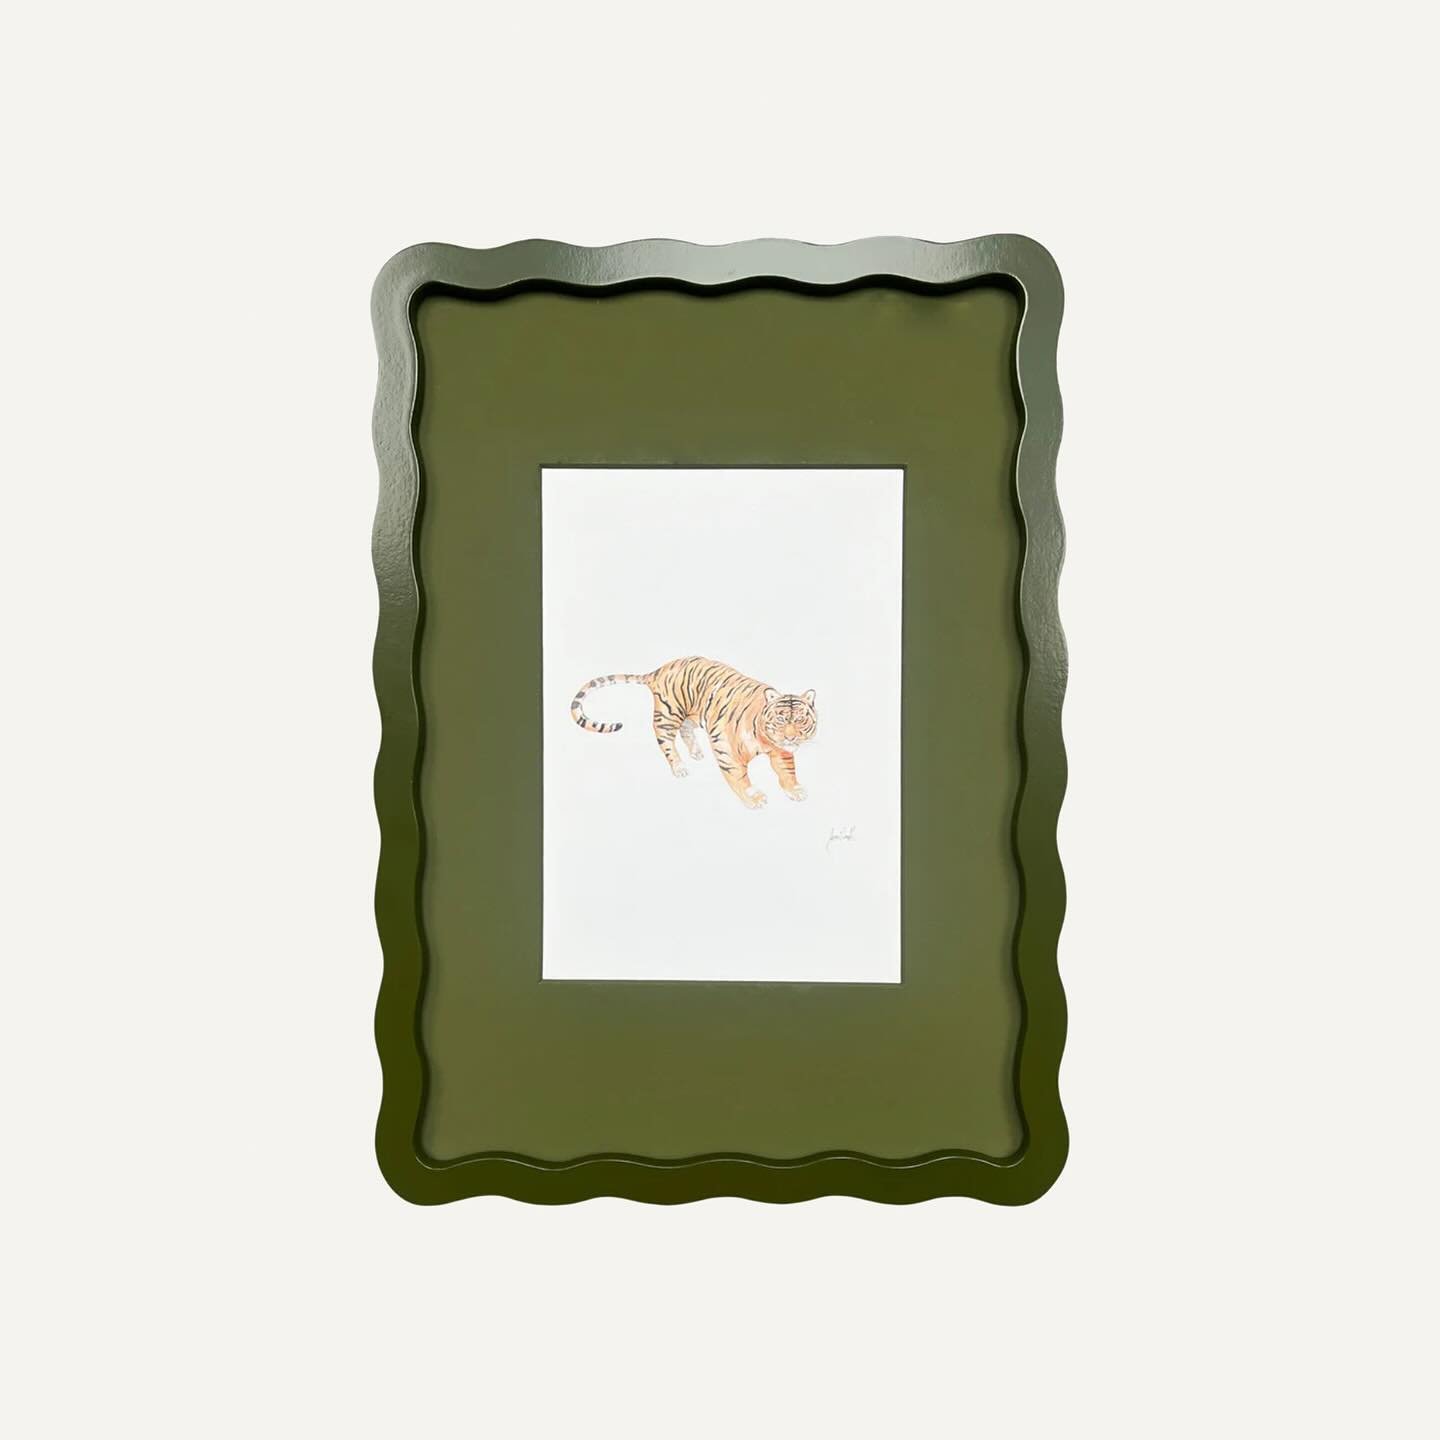 We love our safari &amp; jungle animal collection 🦒🦩🐘🦓 🐅

〰️ elevated in combination with these wiggle frames @almaframes 

#animals #safari #jungle #watercolour #art #wavey #scalloped #kidsbedroom #wallart #affordableart